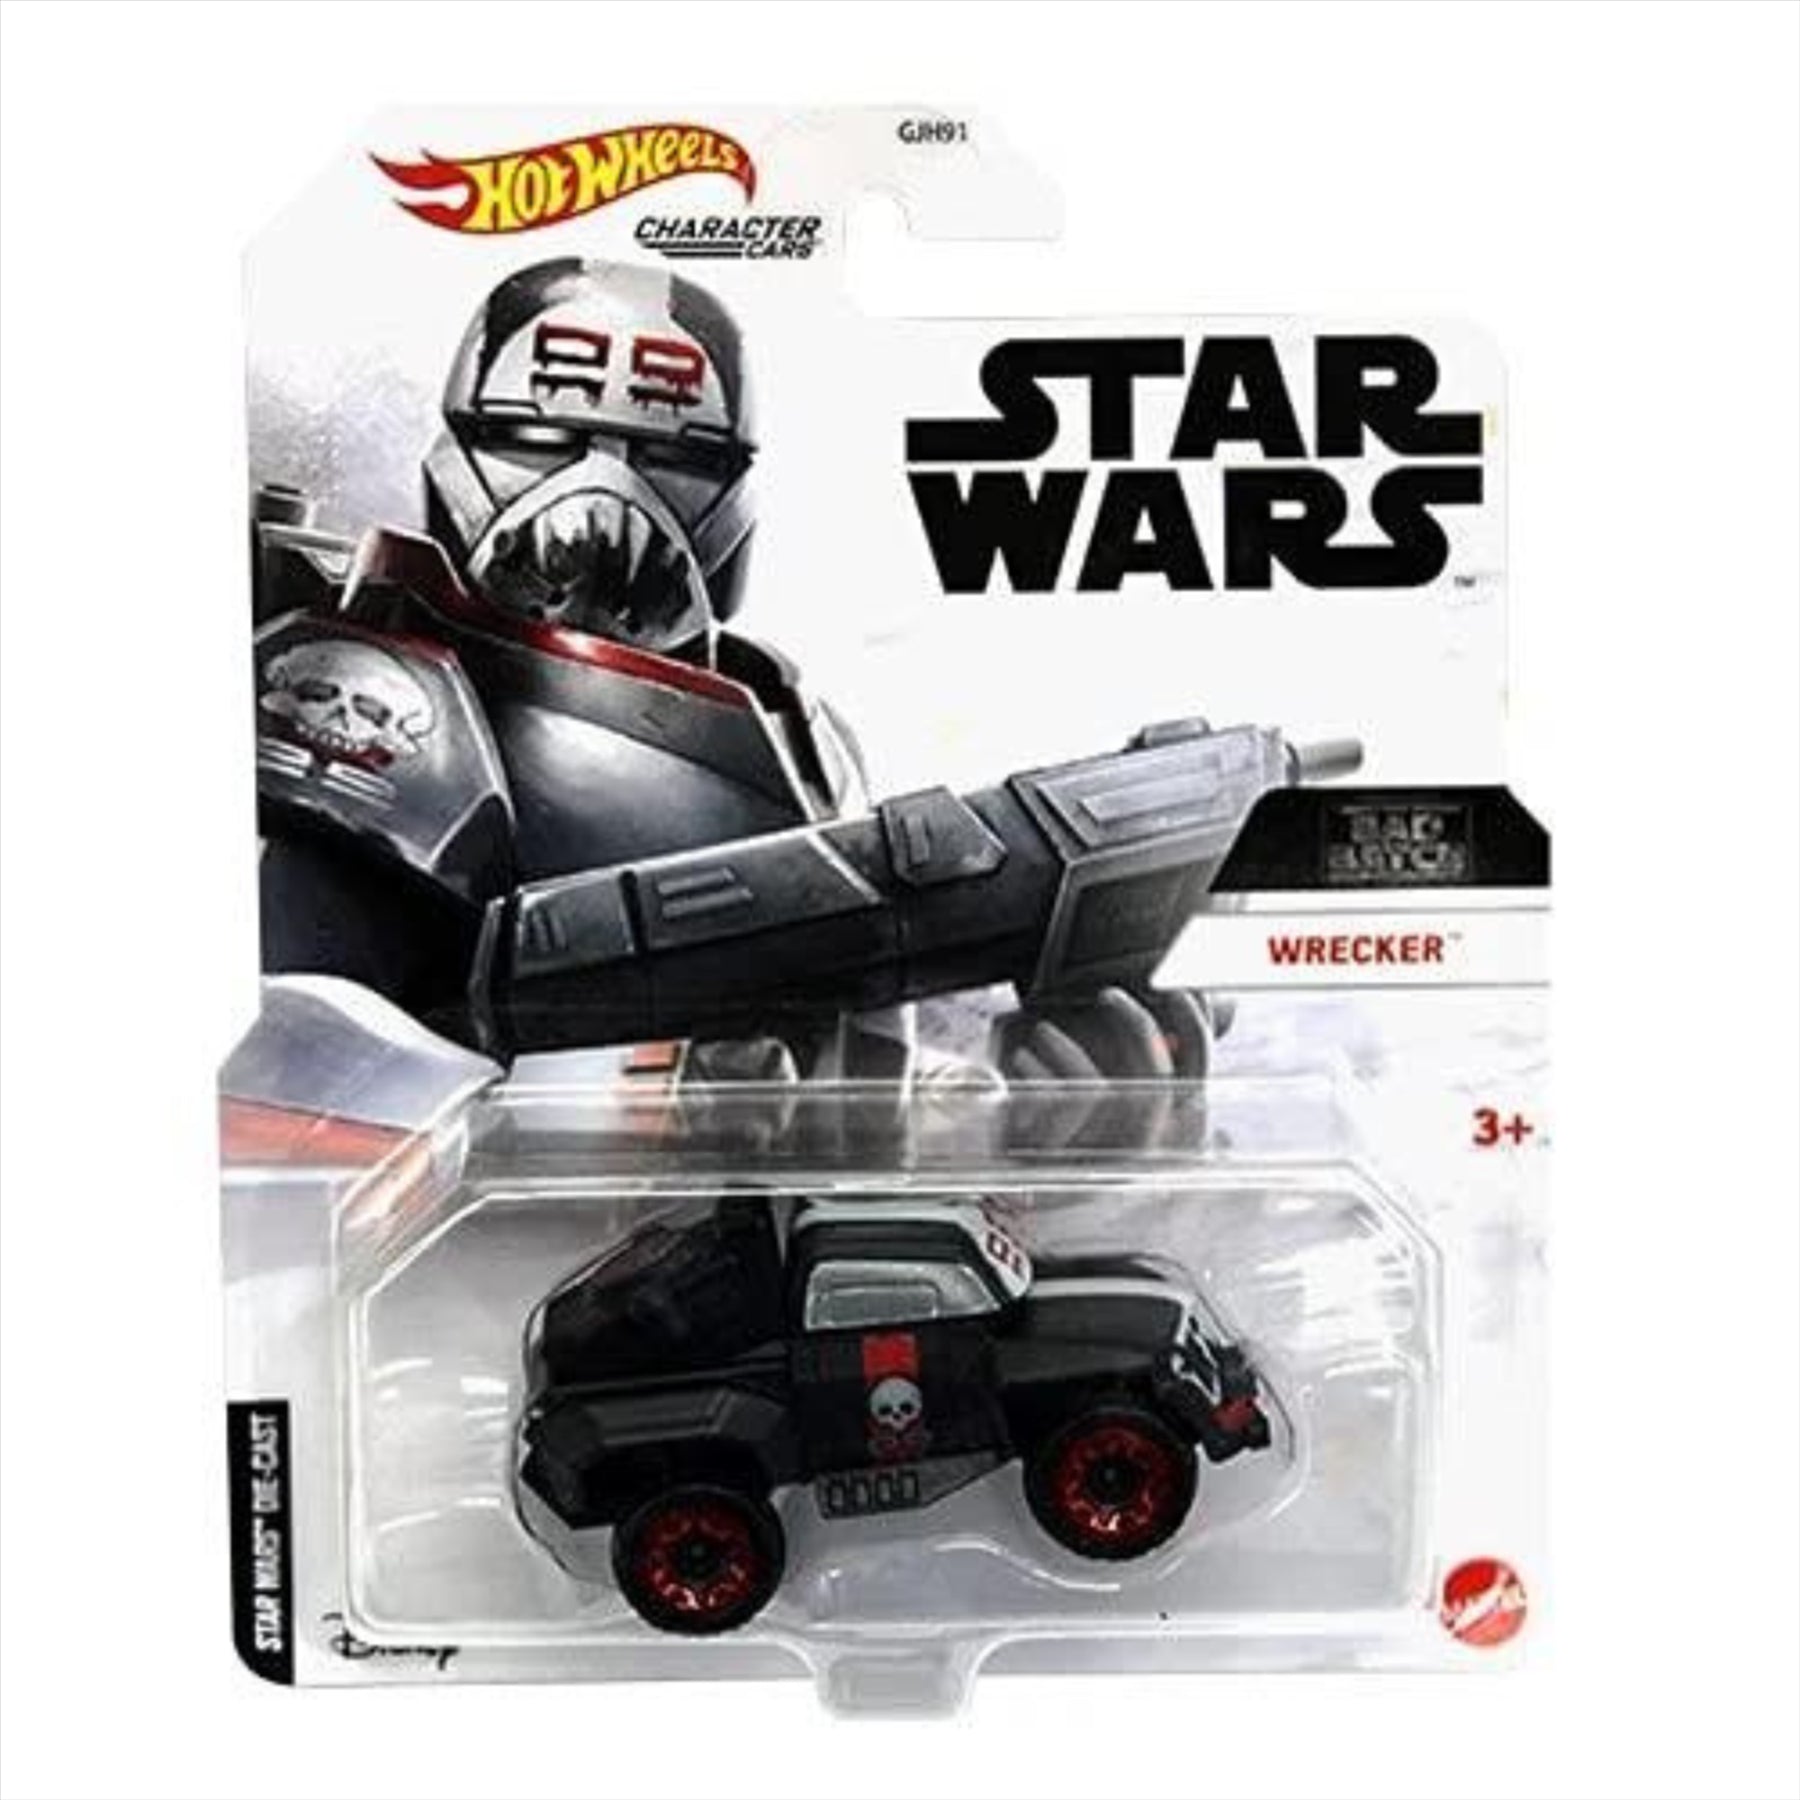 Star-Wars The Child Wall Clock, Clone Wars Voice Keychain and Hot Wheels Character Car Wrecker - Toptoys2u